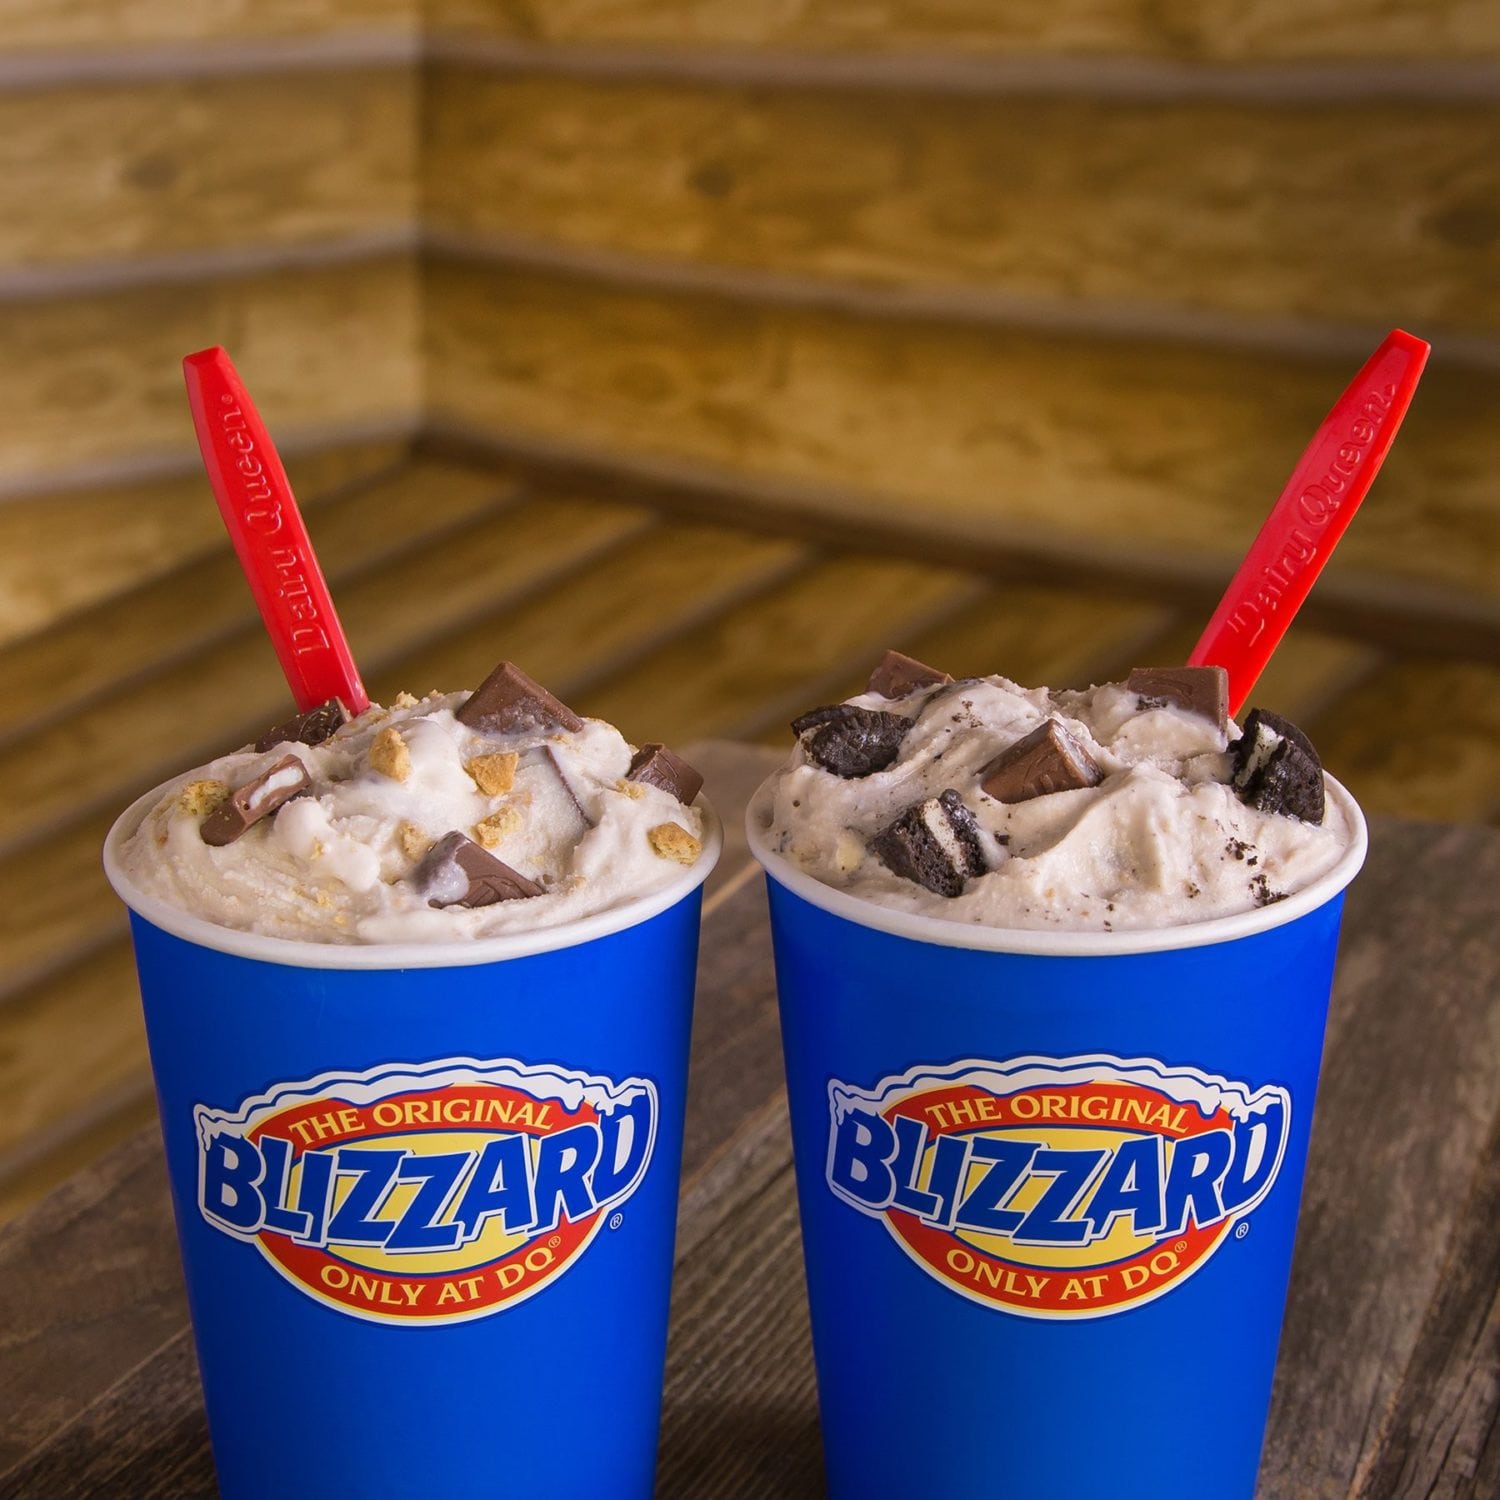 Here's how you can get your free Dairy Queen Blizzard